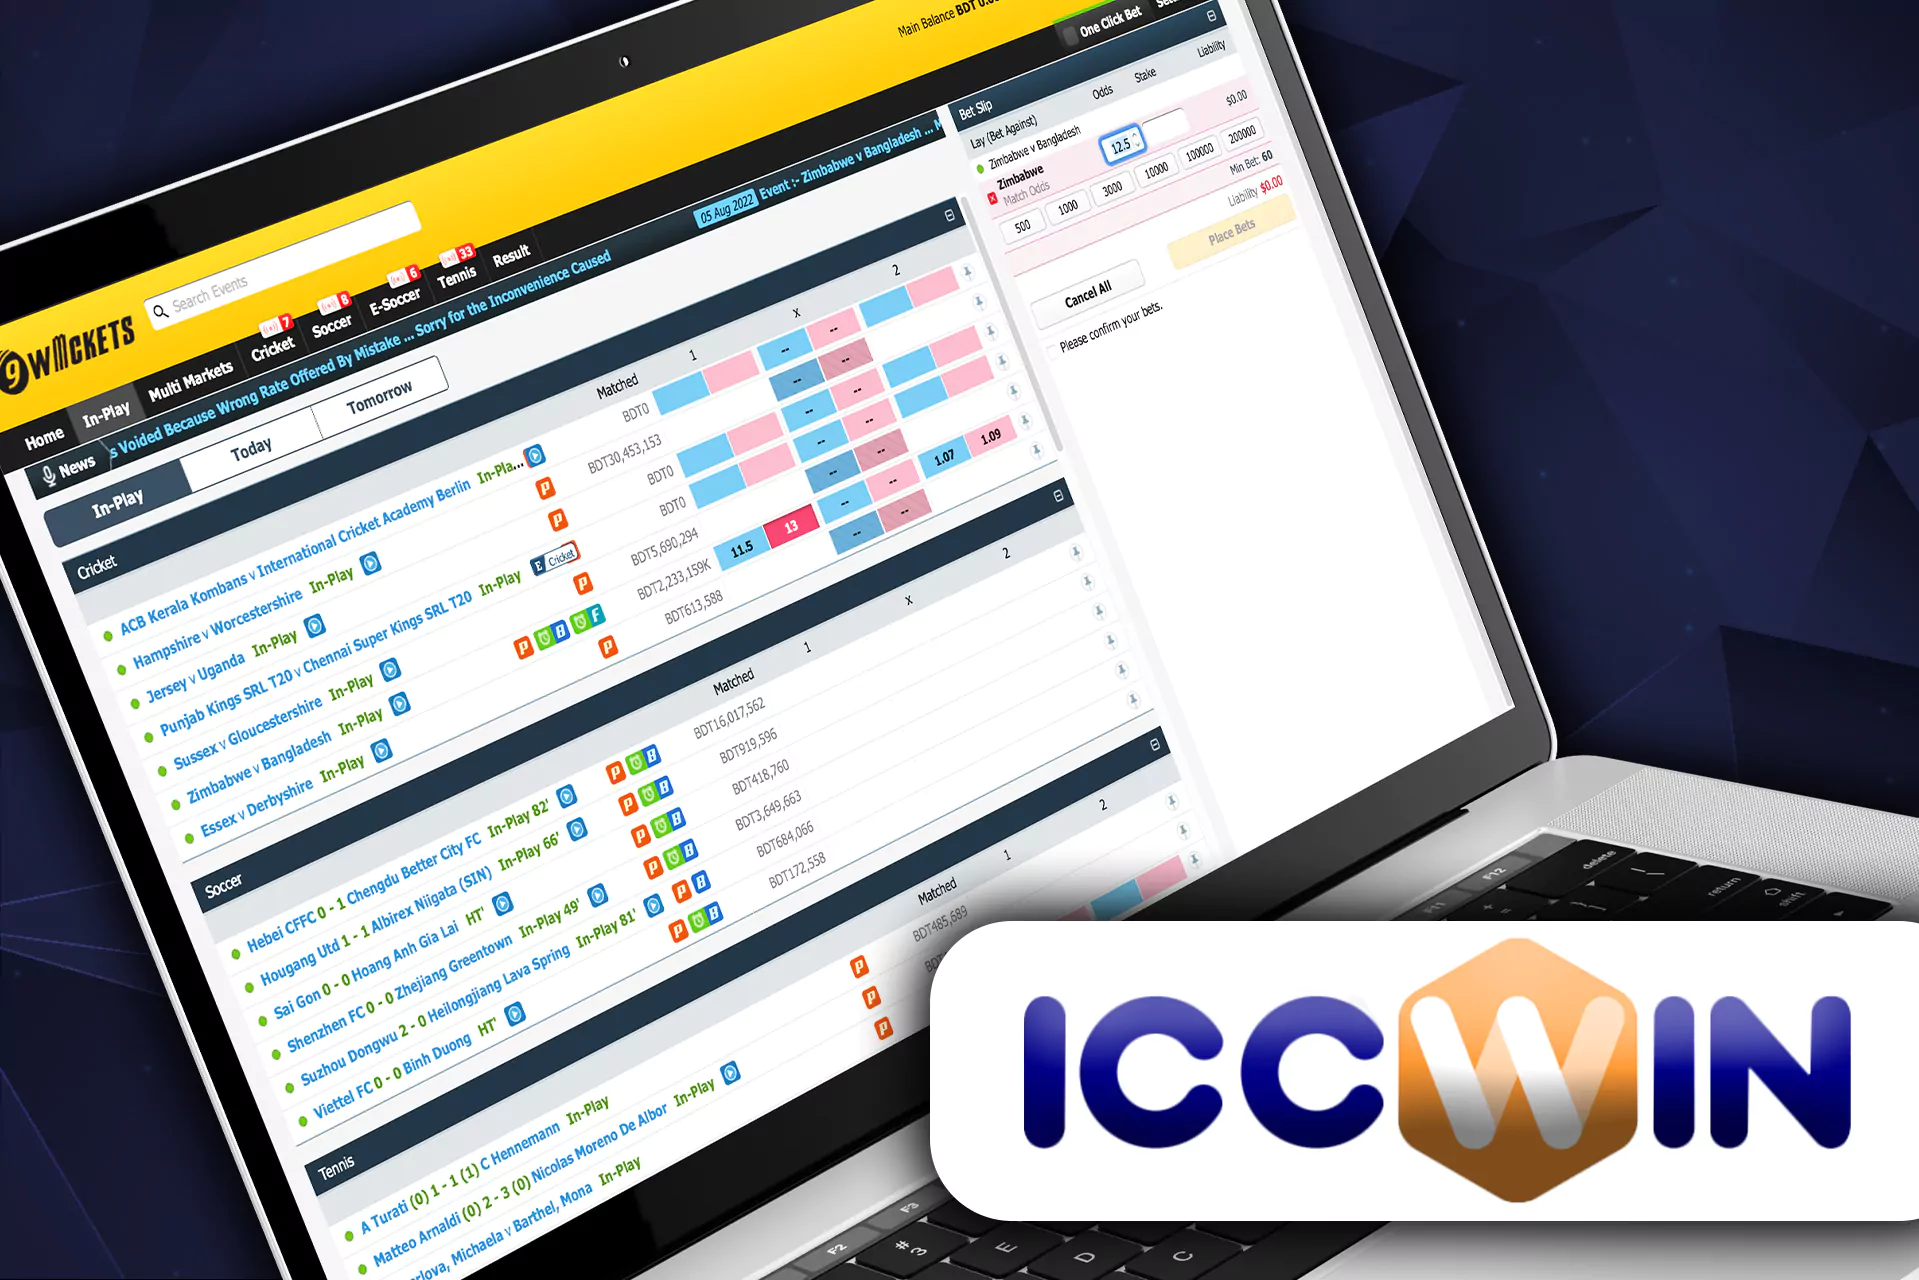 ICCWIN allows placing bets during the match.